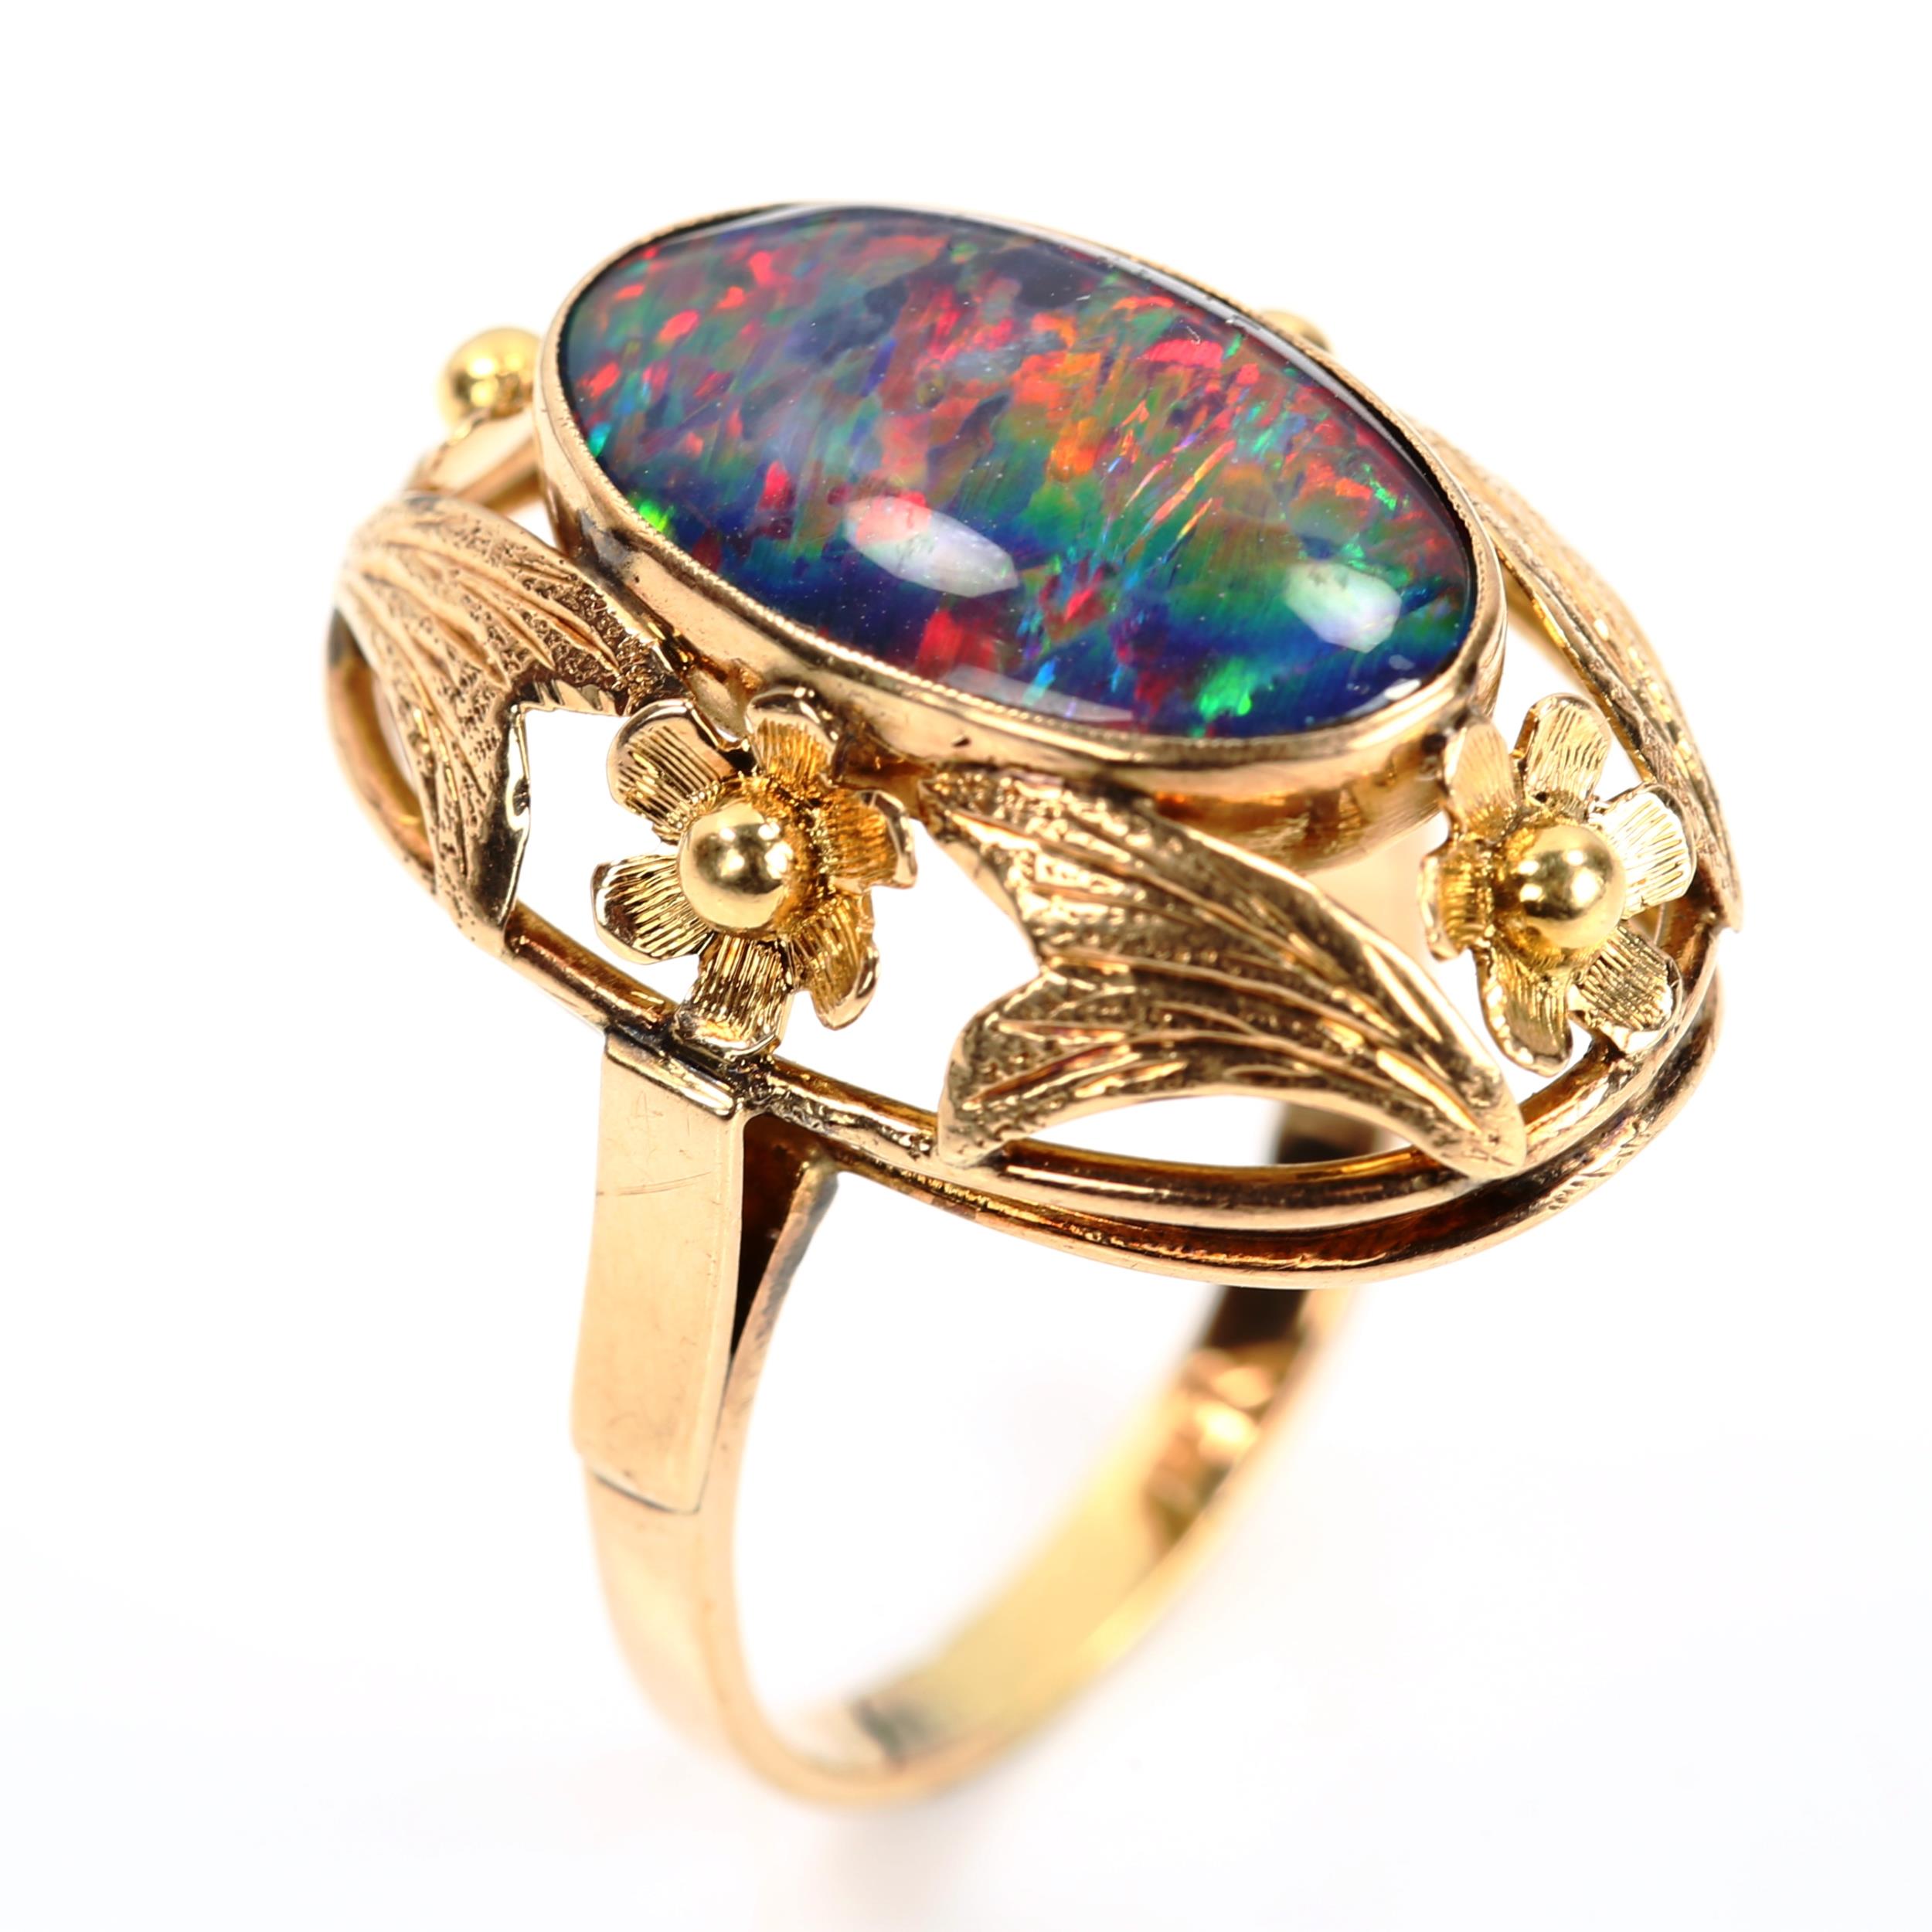 A large Continental black opal doublet dress ring, unmarked gold settings with floral bezel, setting - Image 2 of 4